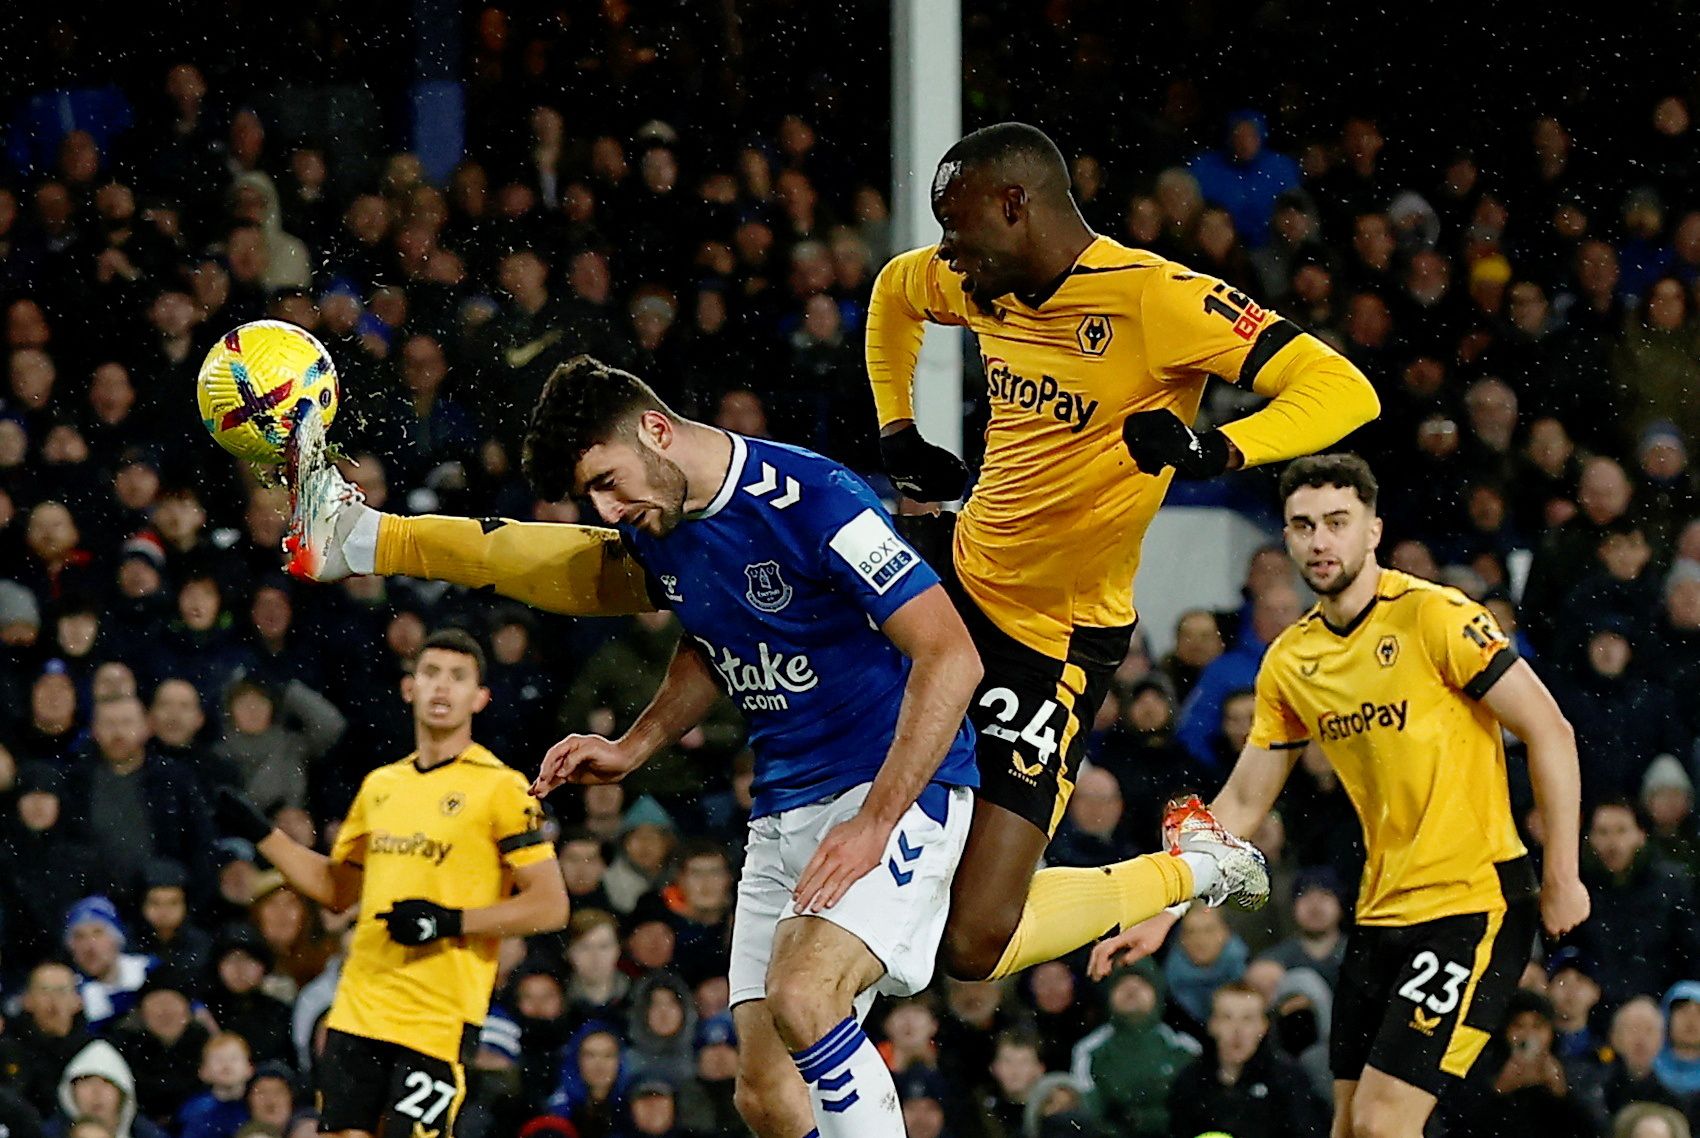 Soccer Football - Premier League - Everton v Wolverhampton Wanderers - Goodison Park, Liverpool, Britain - December 26, 2022 Wolverhampton Wanderers' Toti in action with Everton's Thomas Cannon Action Images via Reuters/Jason Cairnduff EDITORIAL USE ONLY. No use with unauthorized audio, video, data, fixture lists, club/league logos or 'live' services. Online in-match use limited to 75 images, no video emulation. No use in betting, games or single club /league/player publications.  Please contact